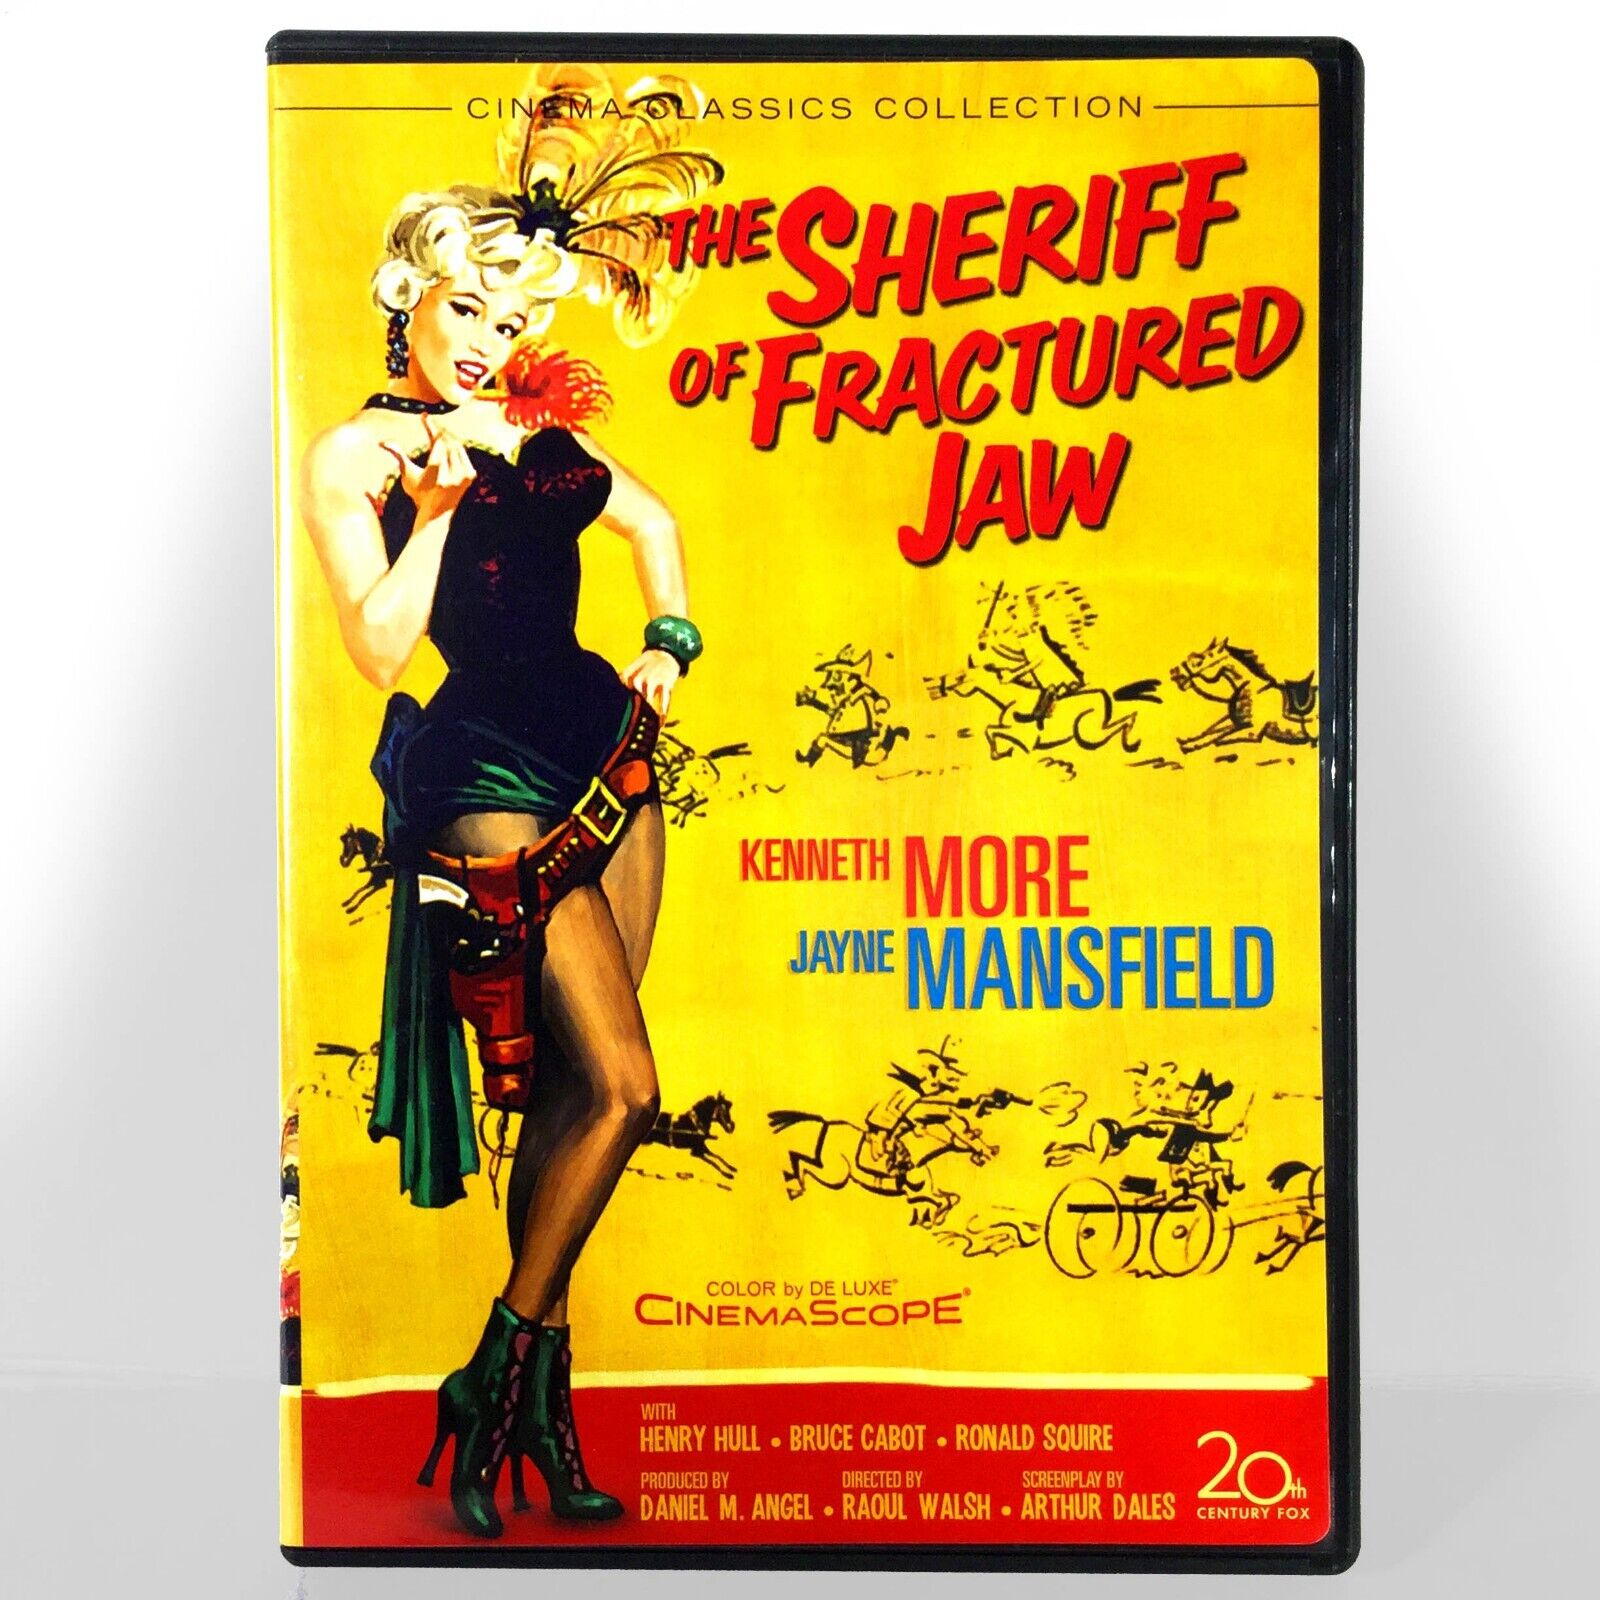 The Sheriff of Fractured Jaw (DVD, 1958, Widescreen) Like New!   Jayne Mansfied